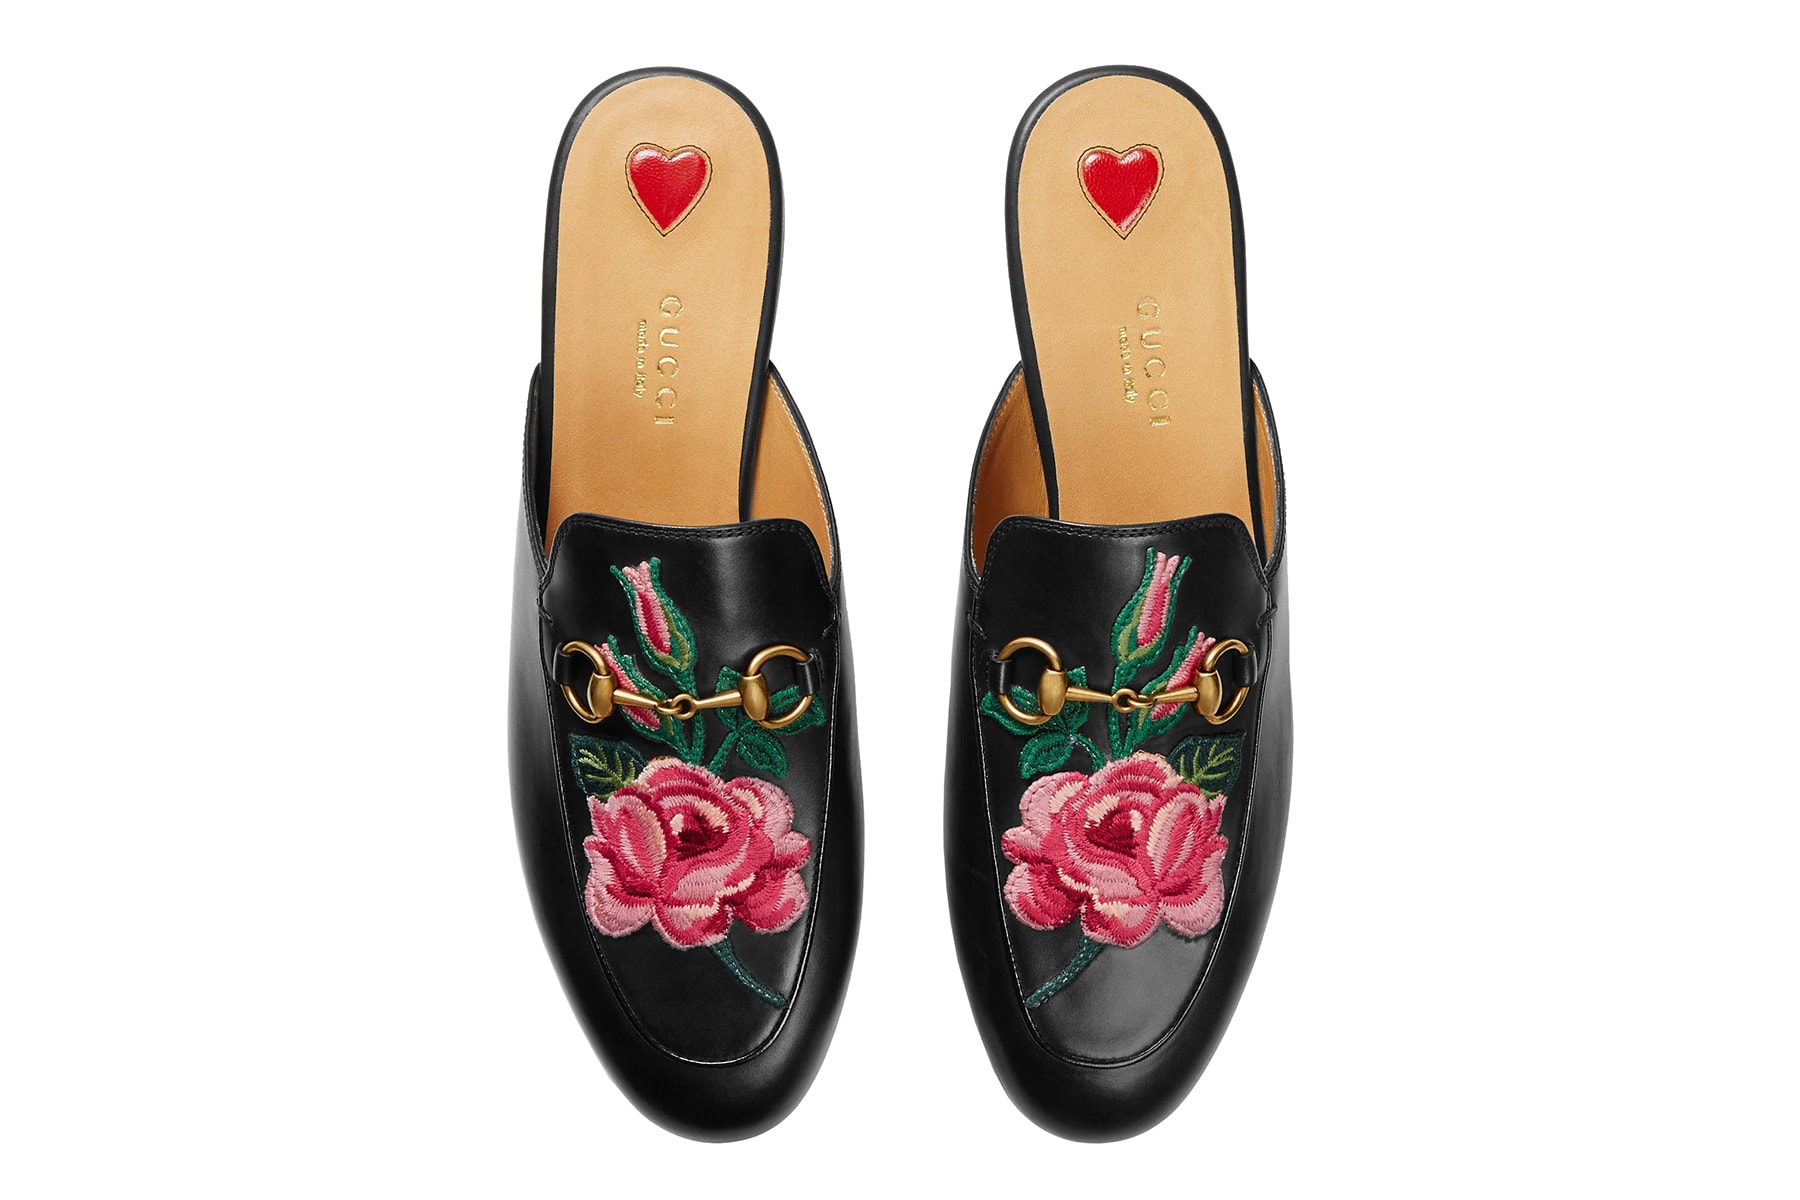 Gucci Floral Embroidered Princetown Leather Slippers Pink Red Black